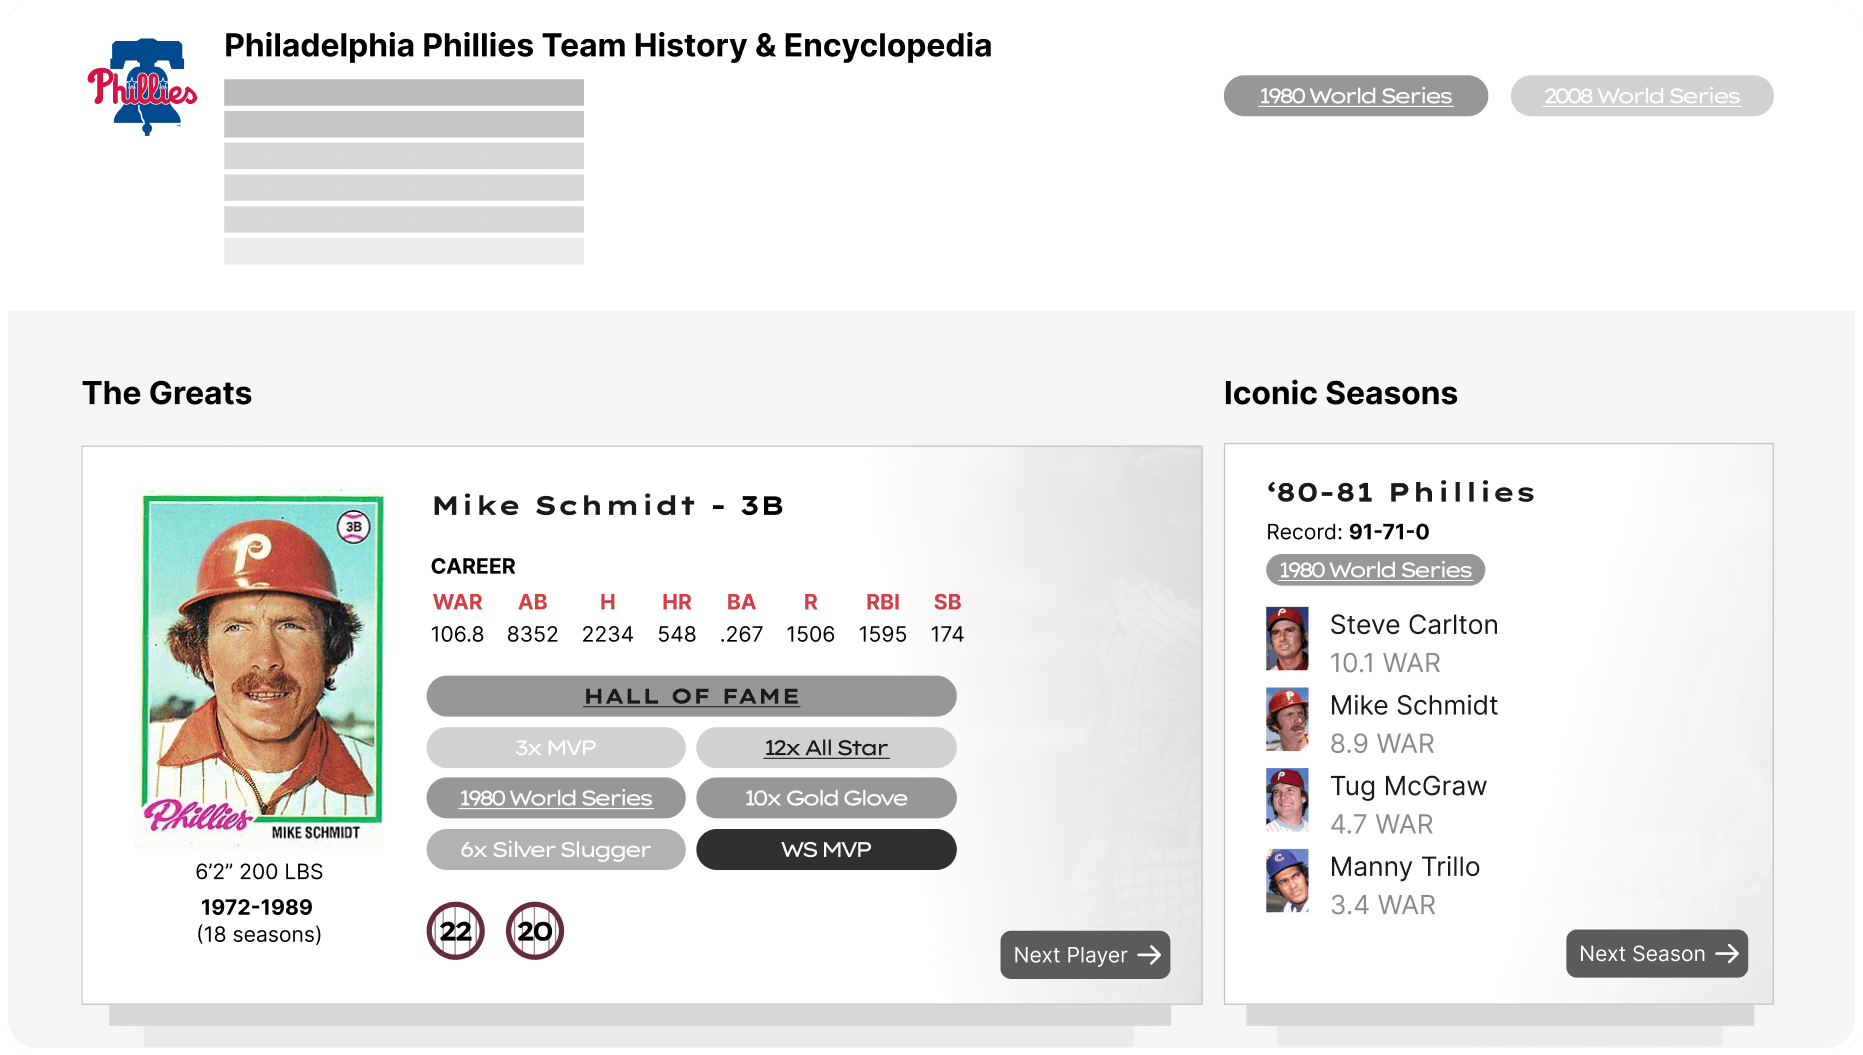 Low-fidelity team encylopedia concept with historical statistics information about the Philadelhia Phillies.